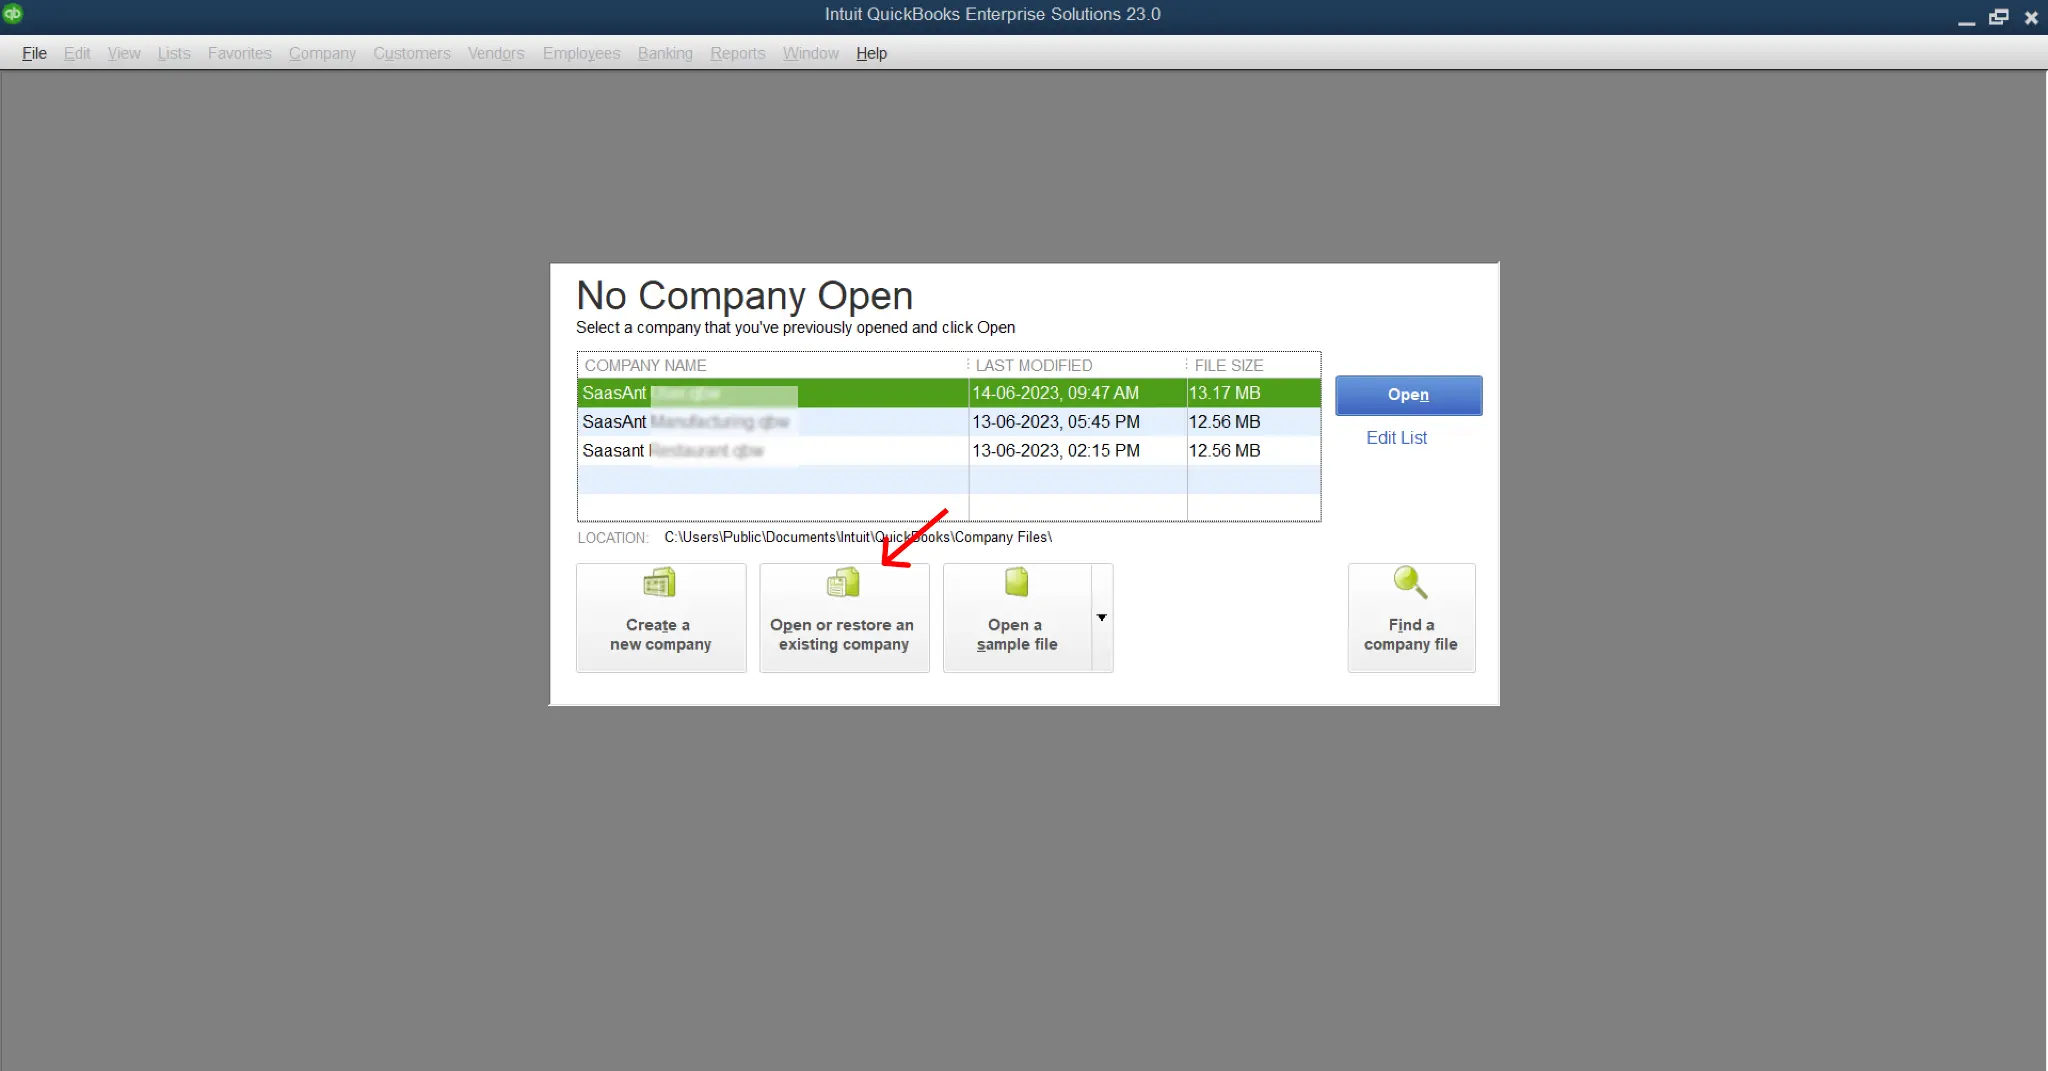 Access the Company File within QuickBooks